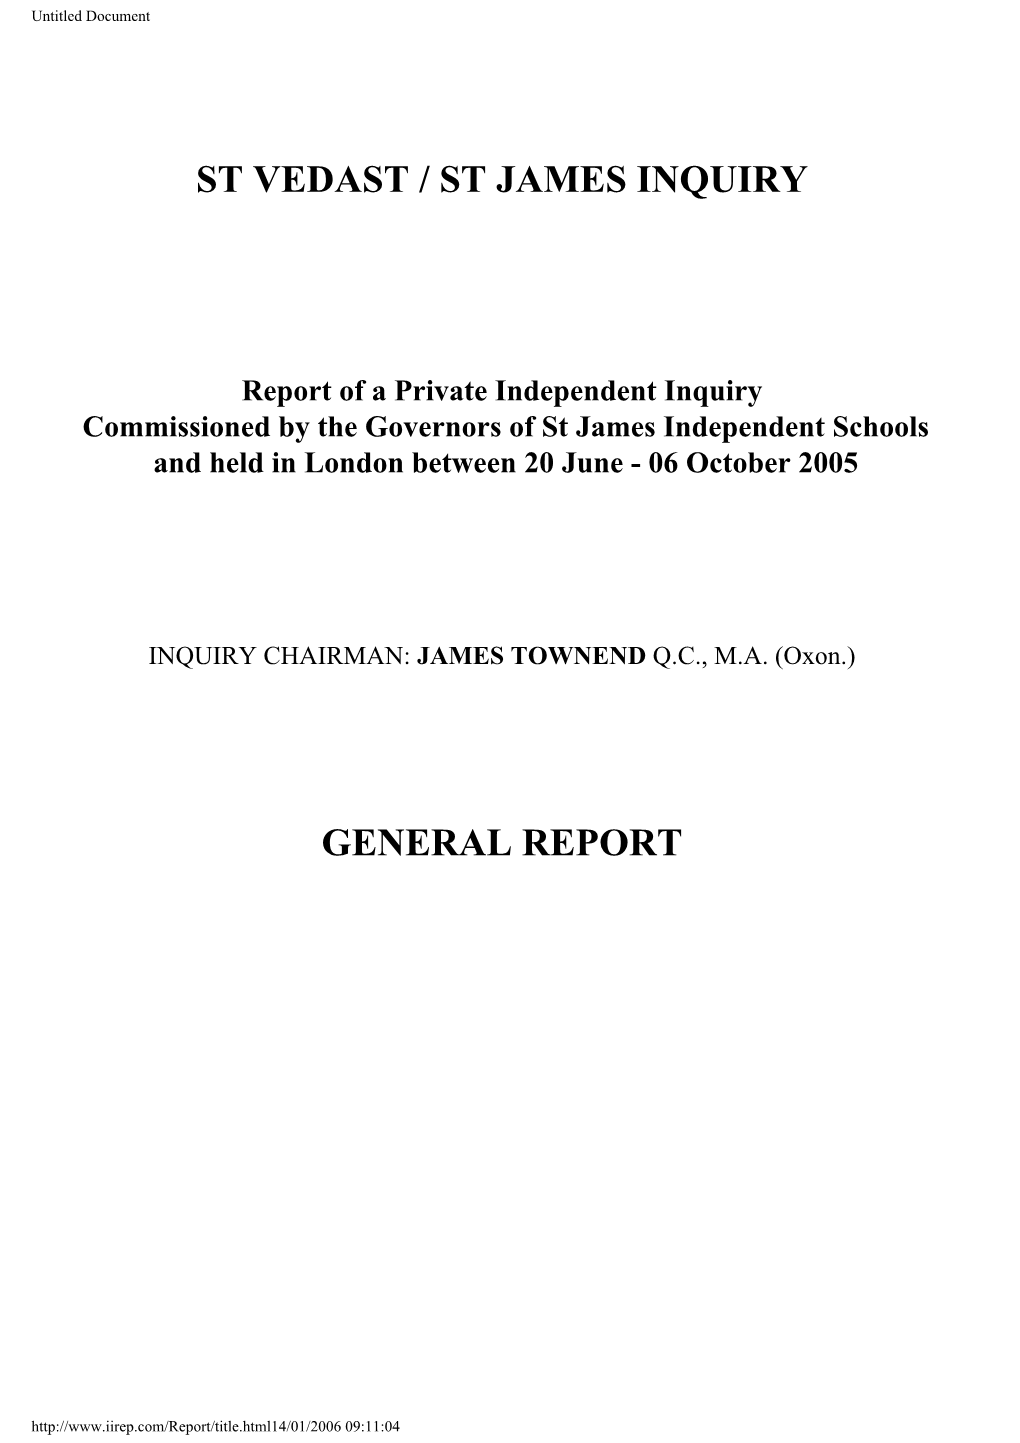 General Report of the Townend Inquiry Into St James Independent